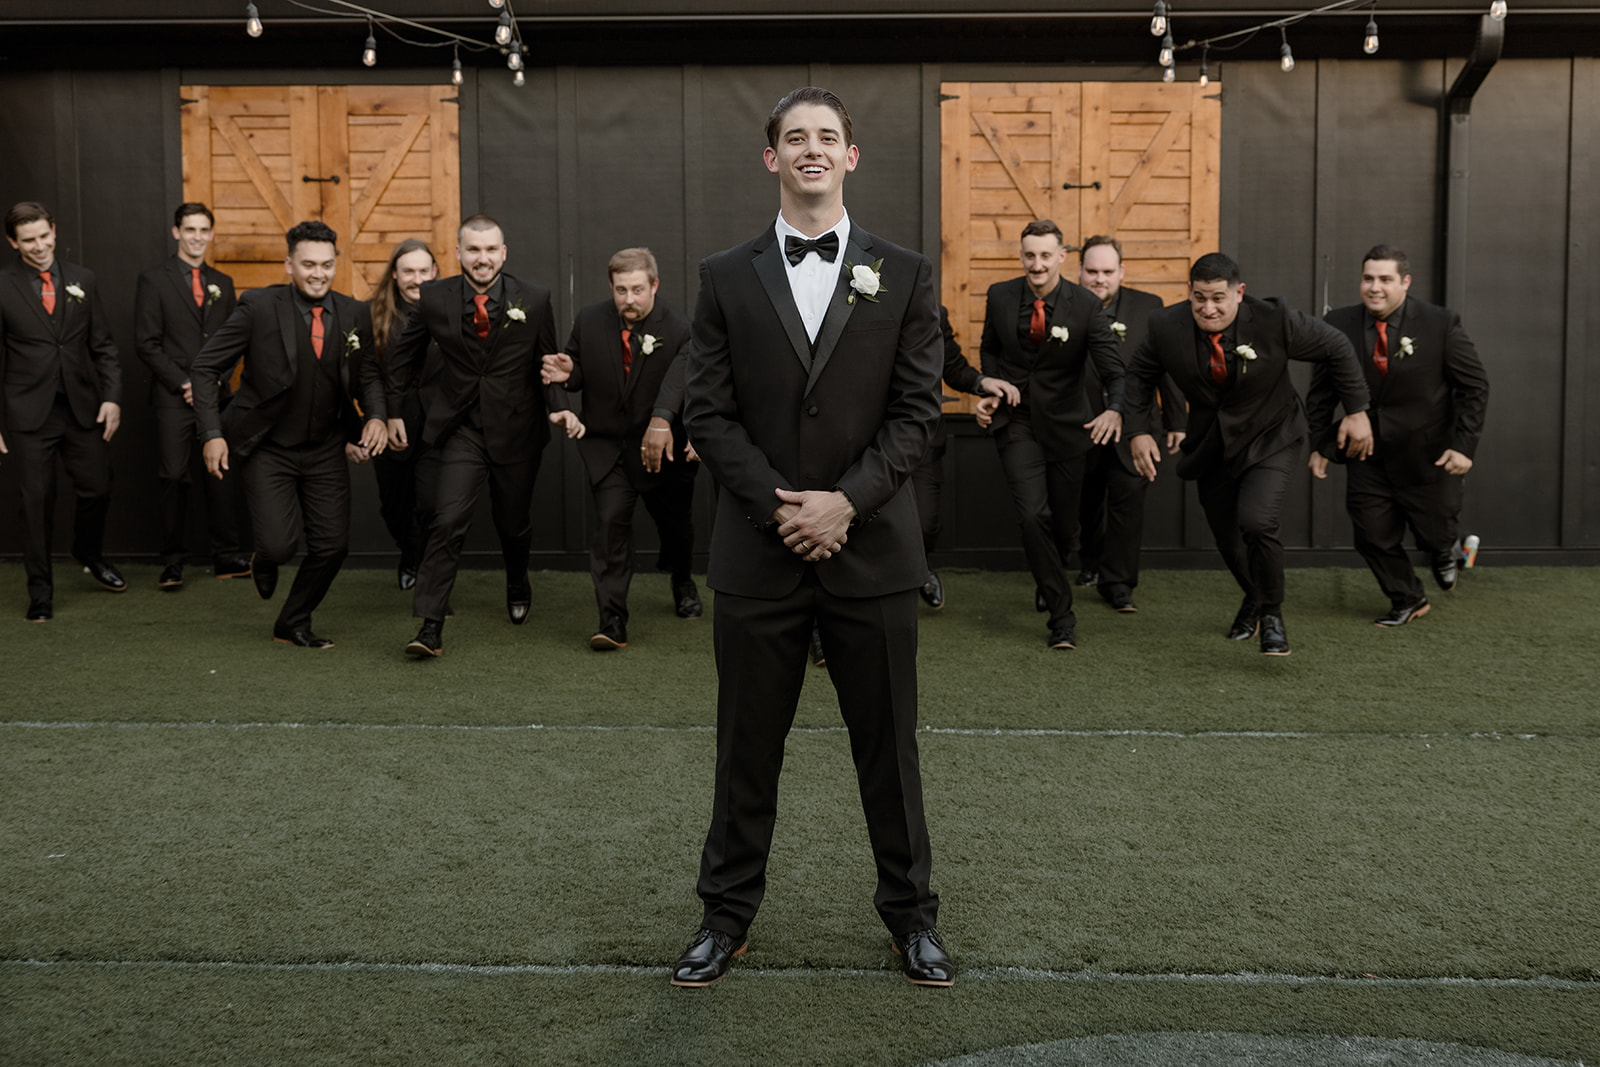 Groom and his groomsmen in classic black suits